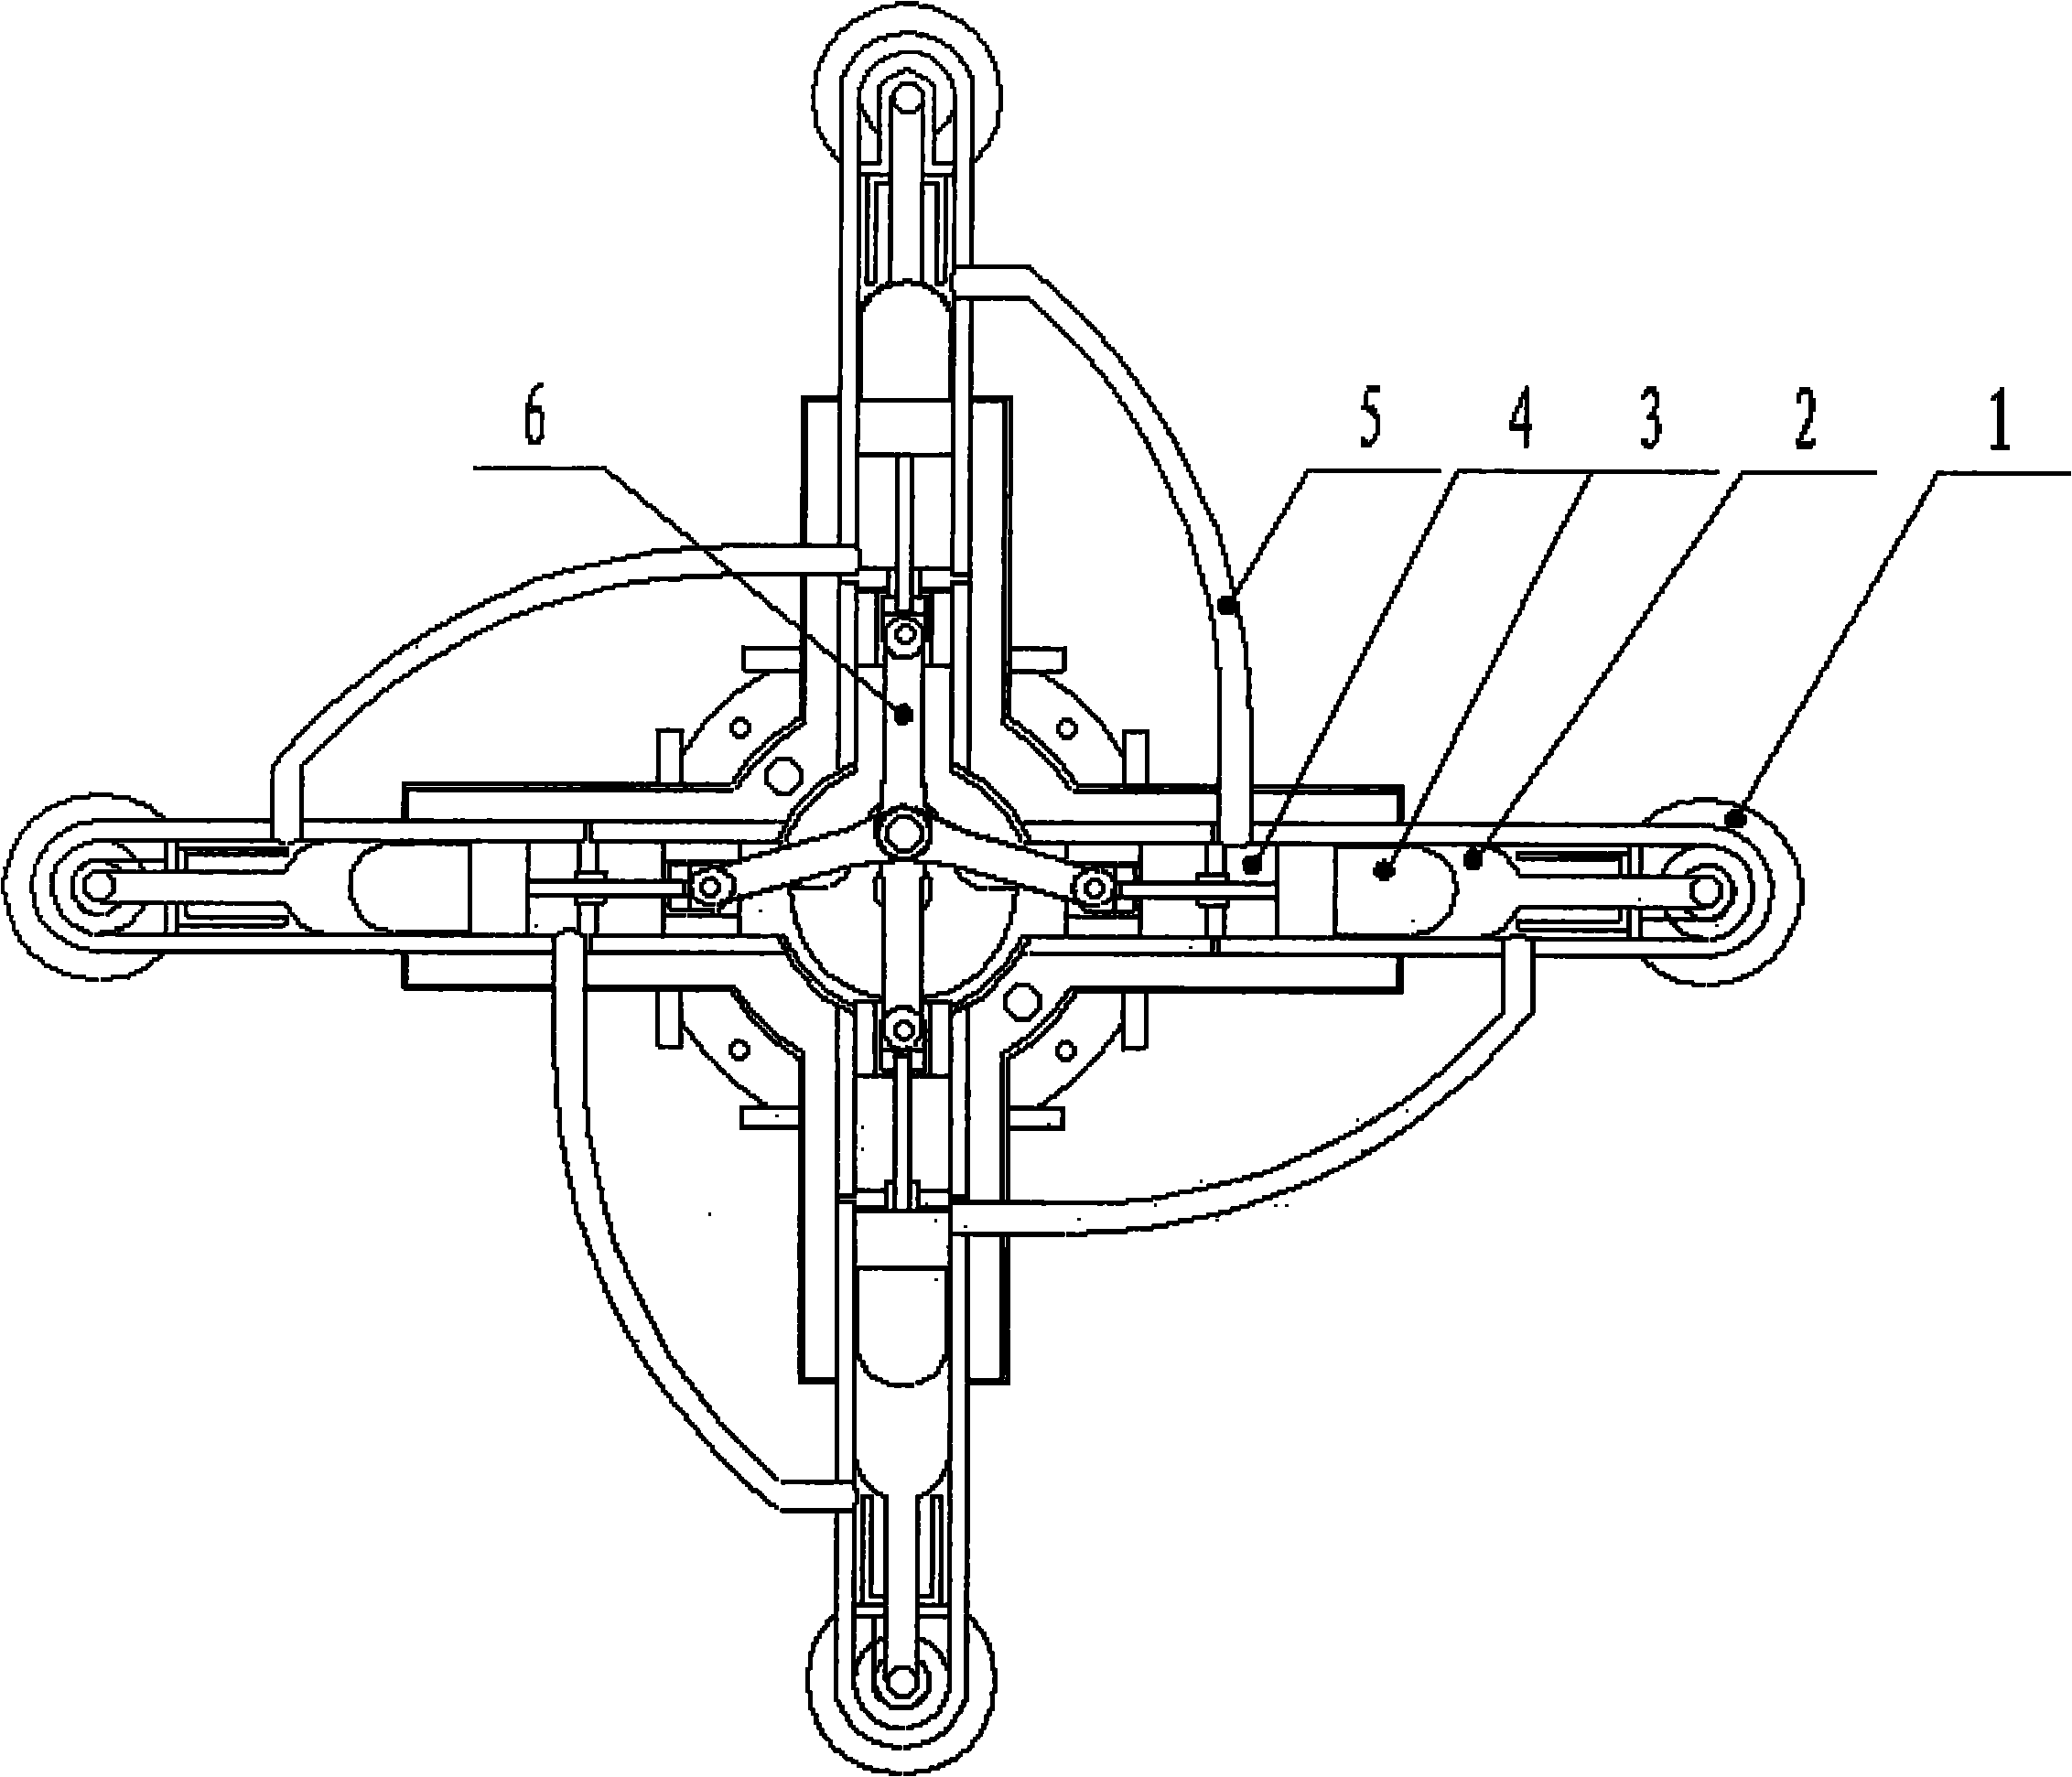 Solar Stirling engine with multi-thermal head structure